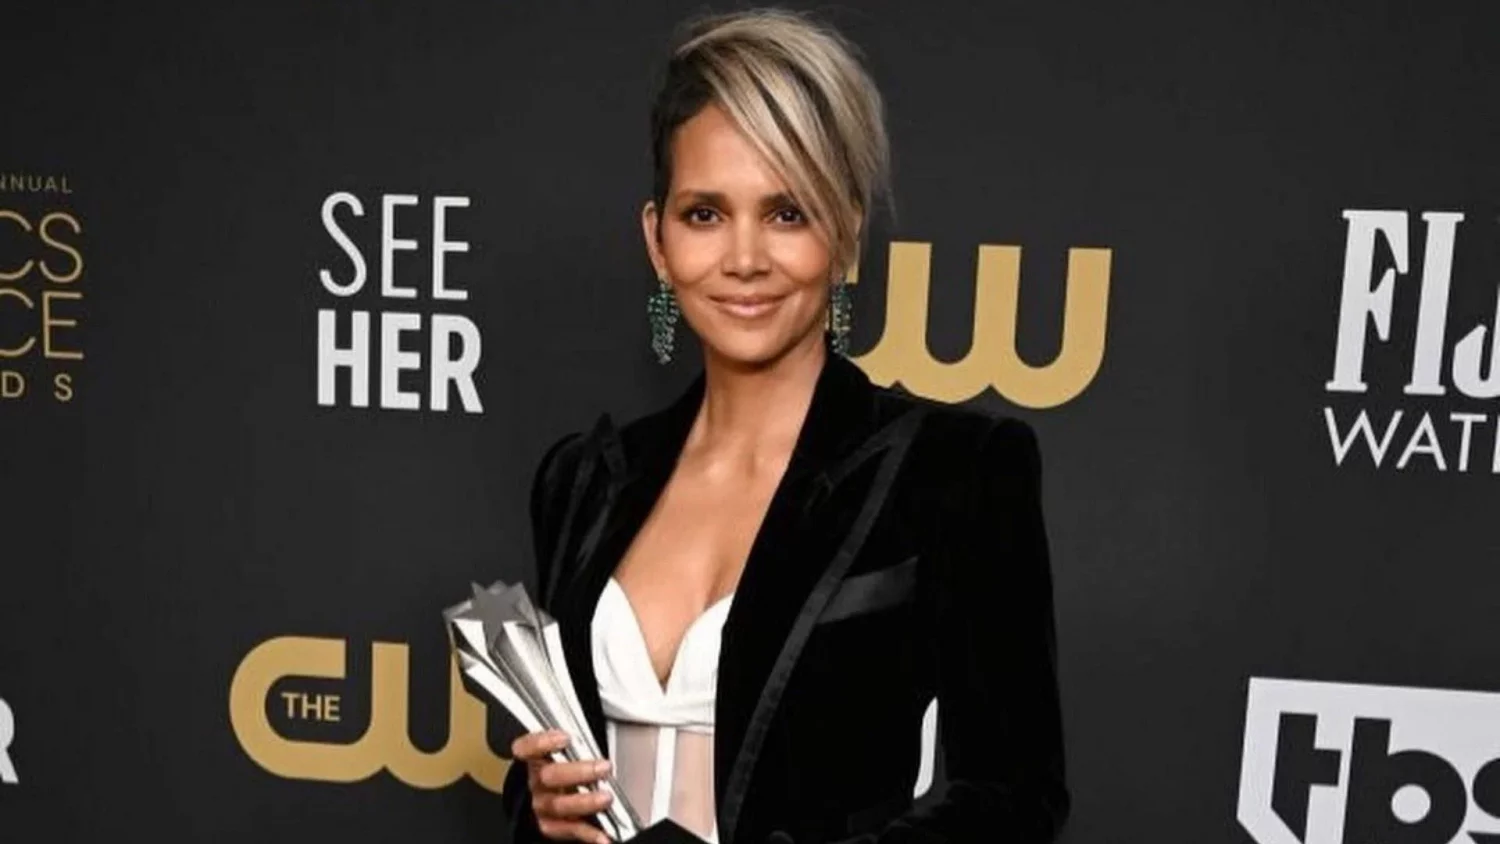 Halle Berry accepting the SeeHer Award